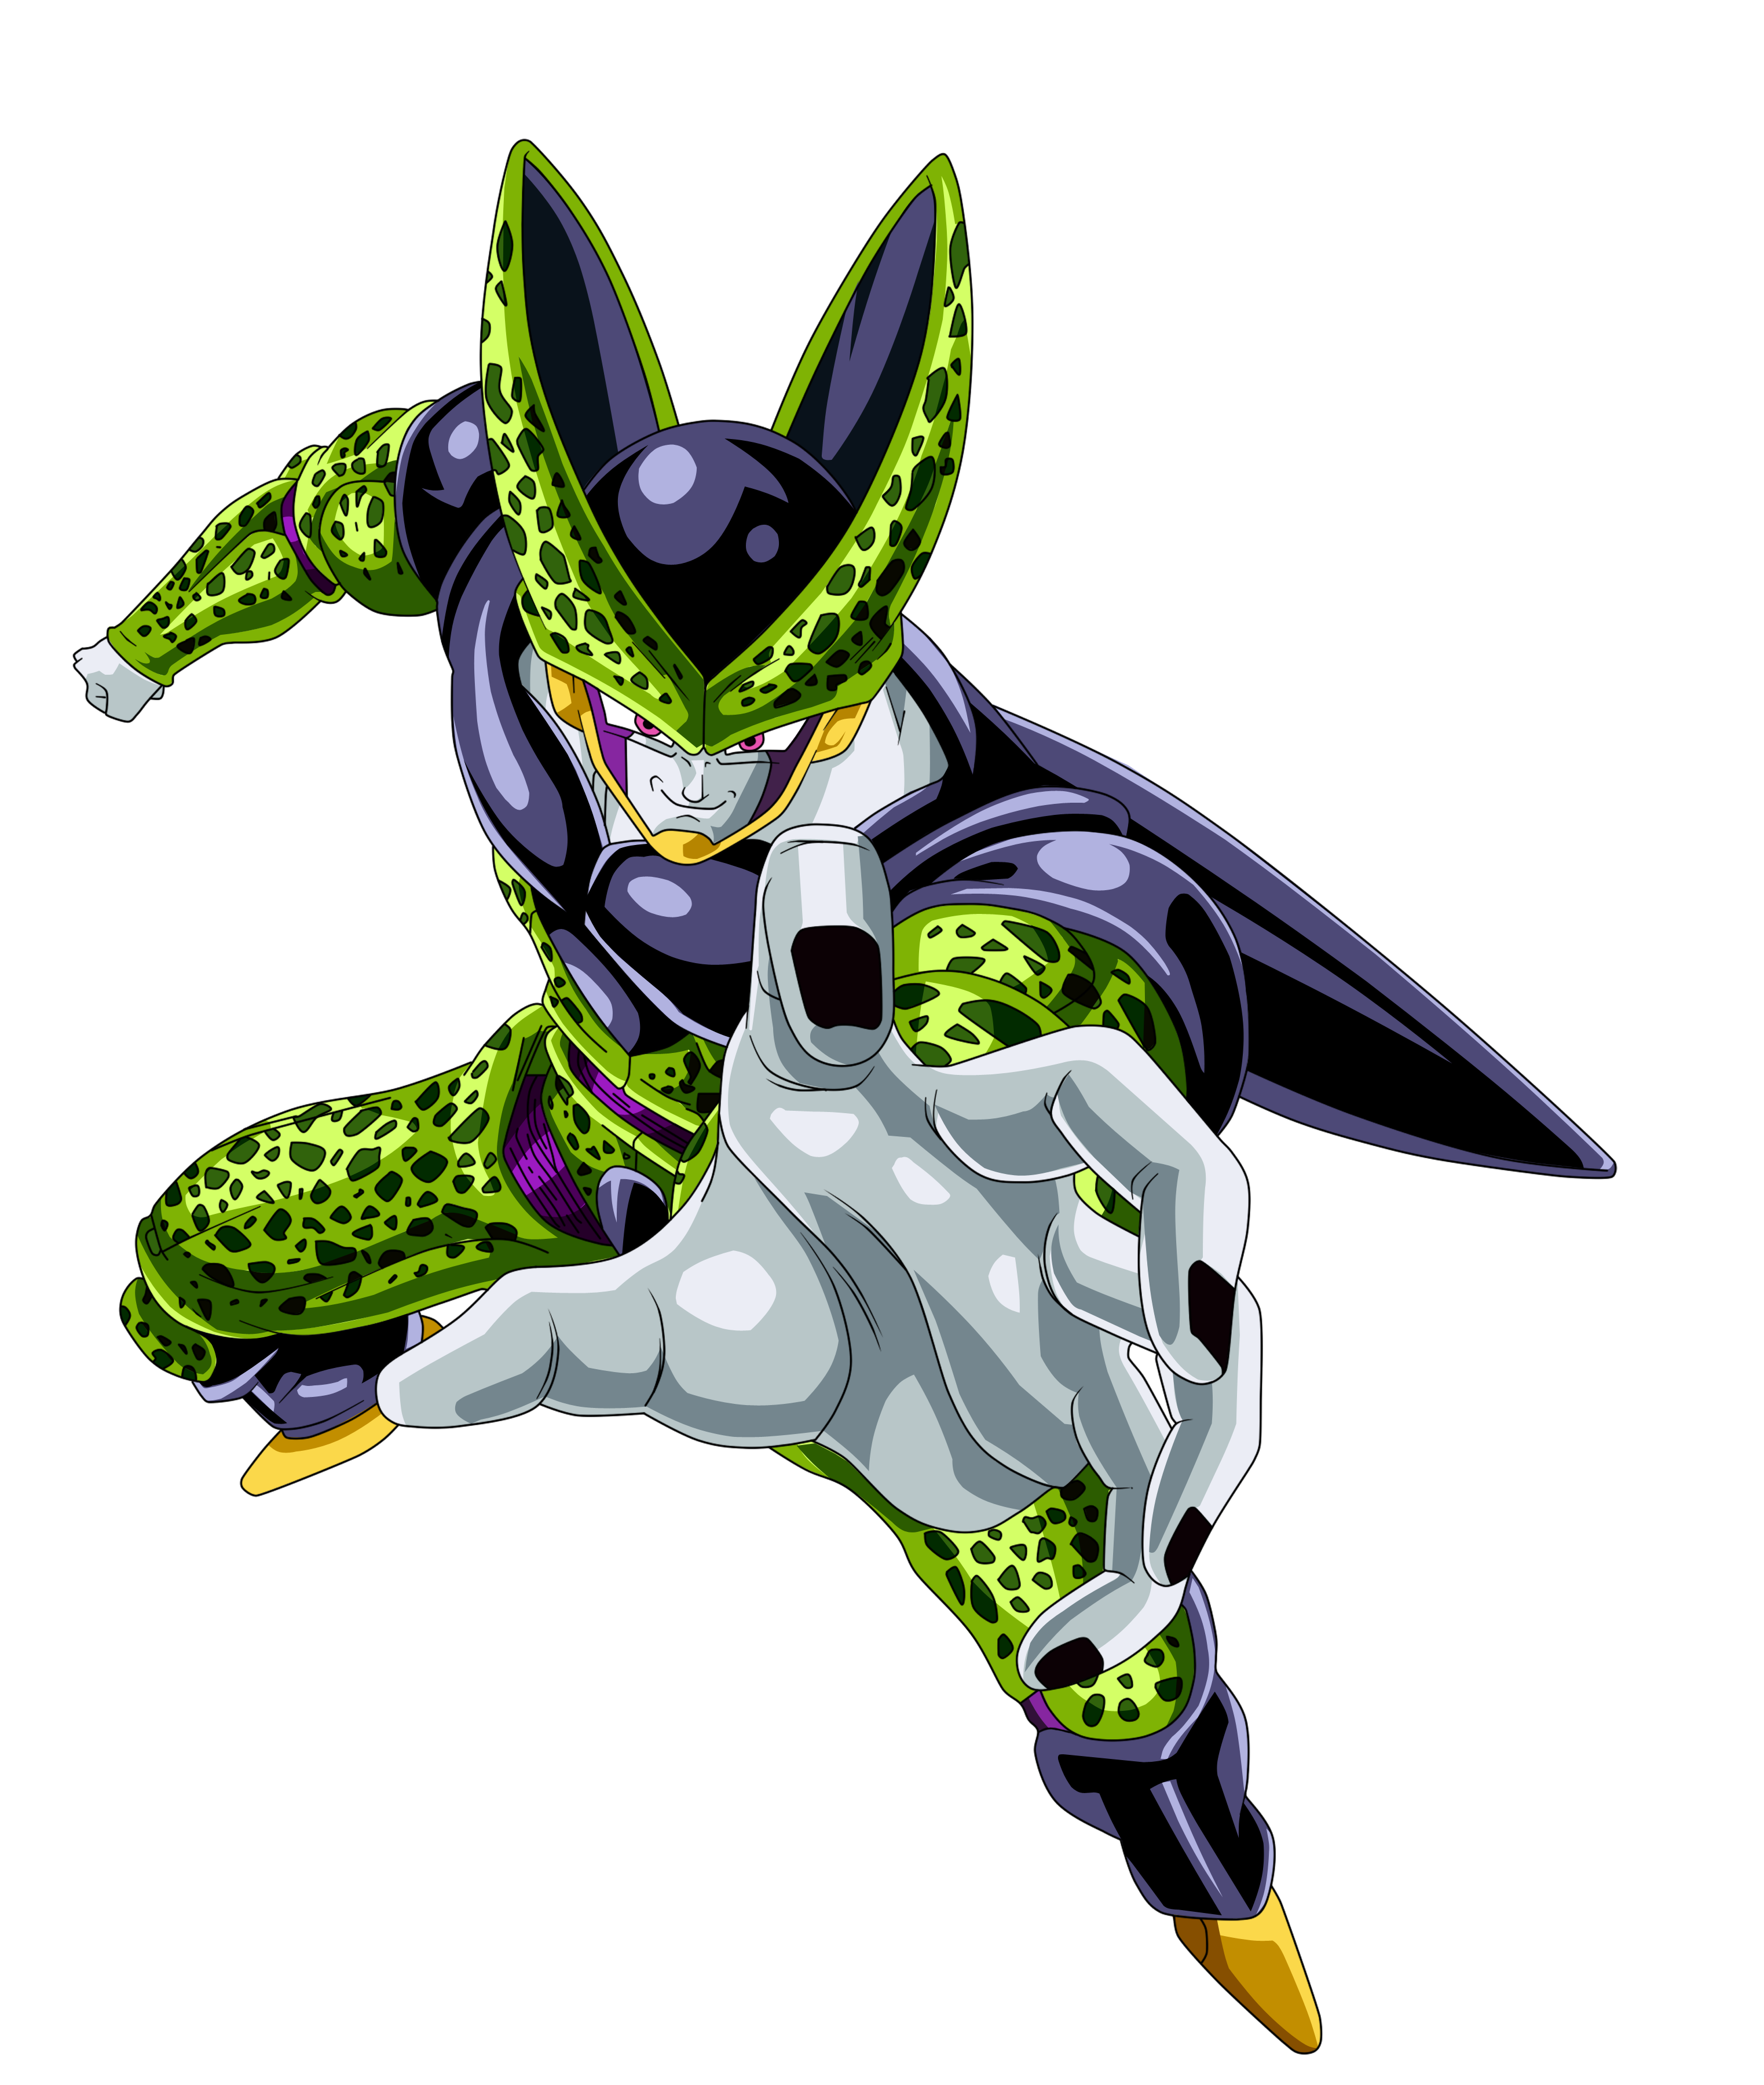 render_cell__forma_perfetta__by_renderdragonball-d4r17d2.png